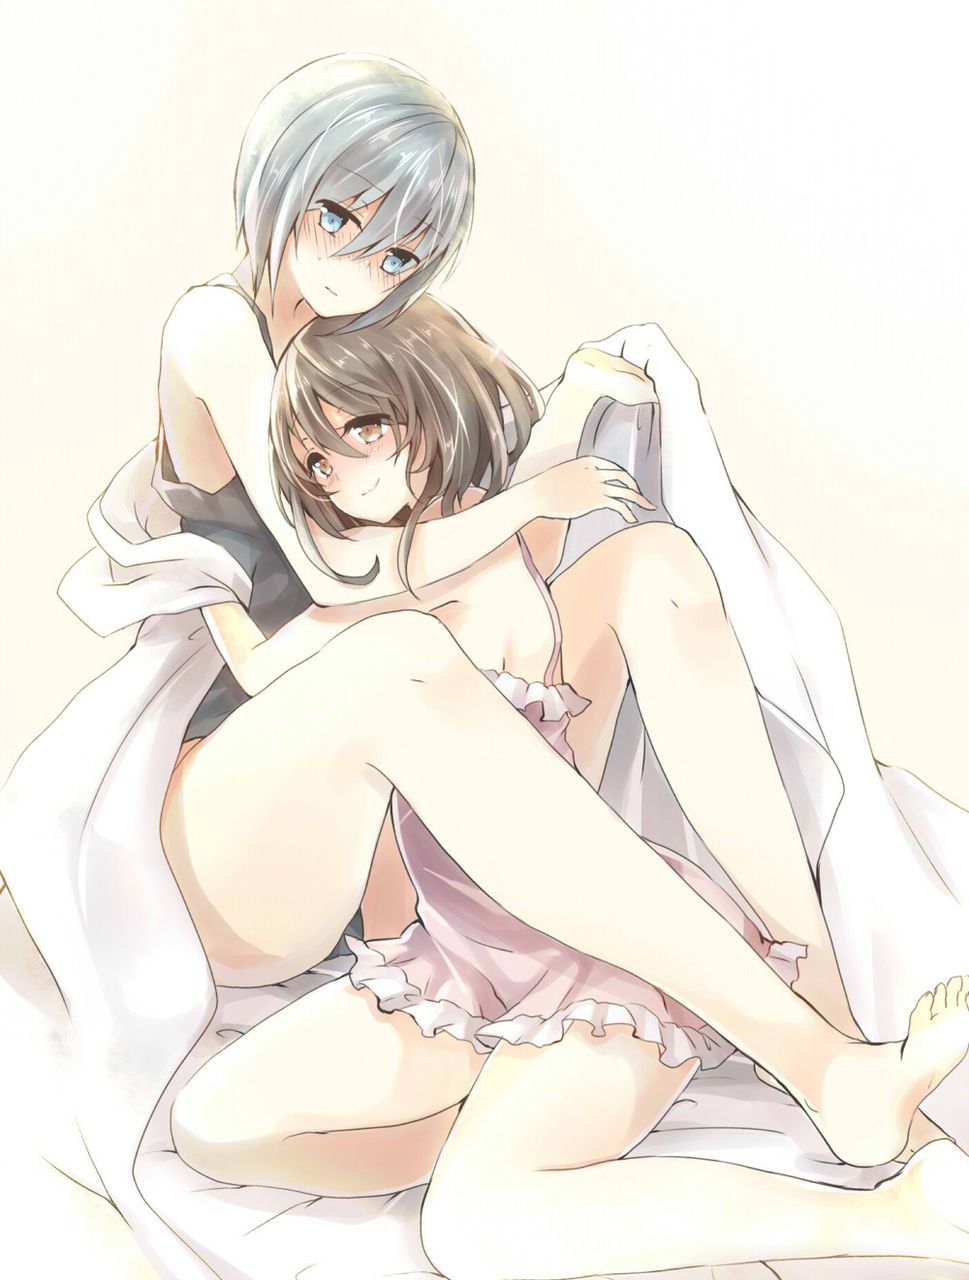 [Yuri] Flirting lesbian erotic image of a girl with each other 9 [2-d] 26